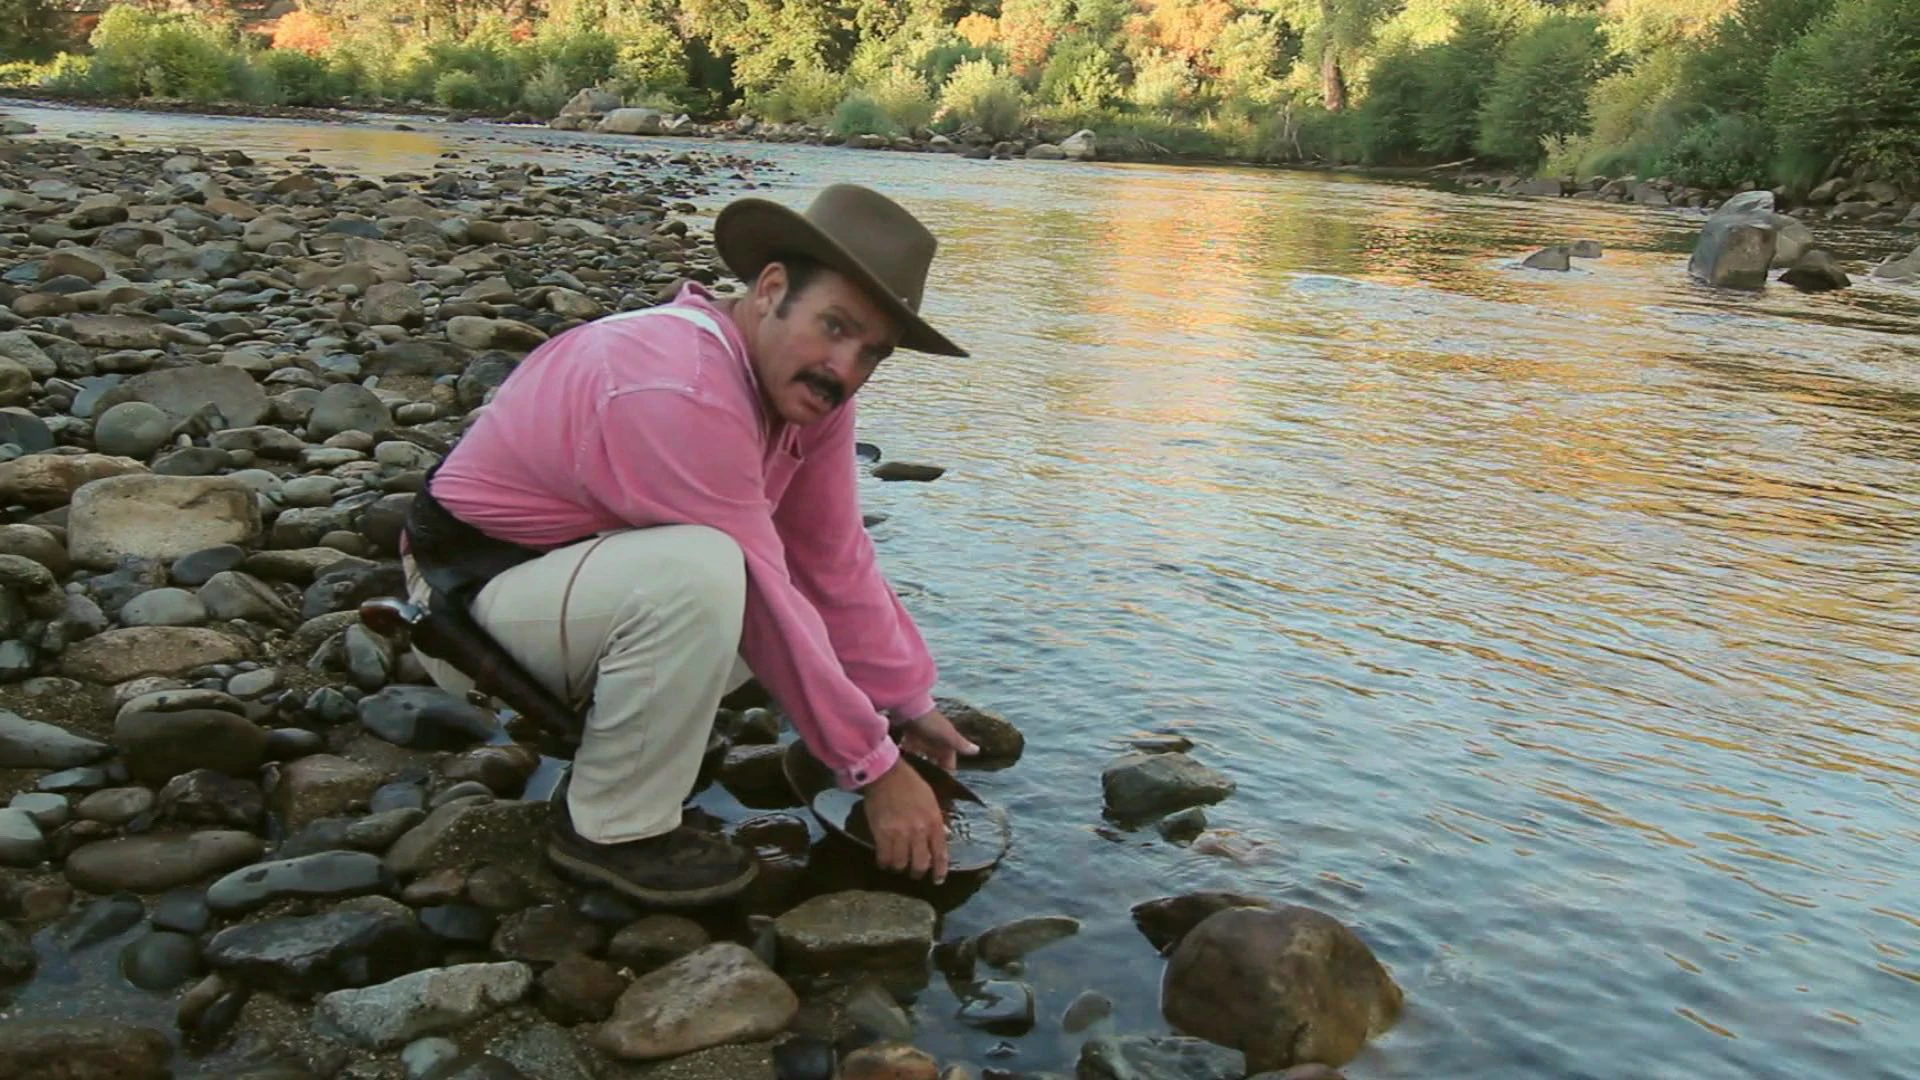 Rob Tillitz as Henry panning for gold in THE GOLdEN TREE (2010).